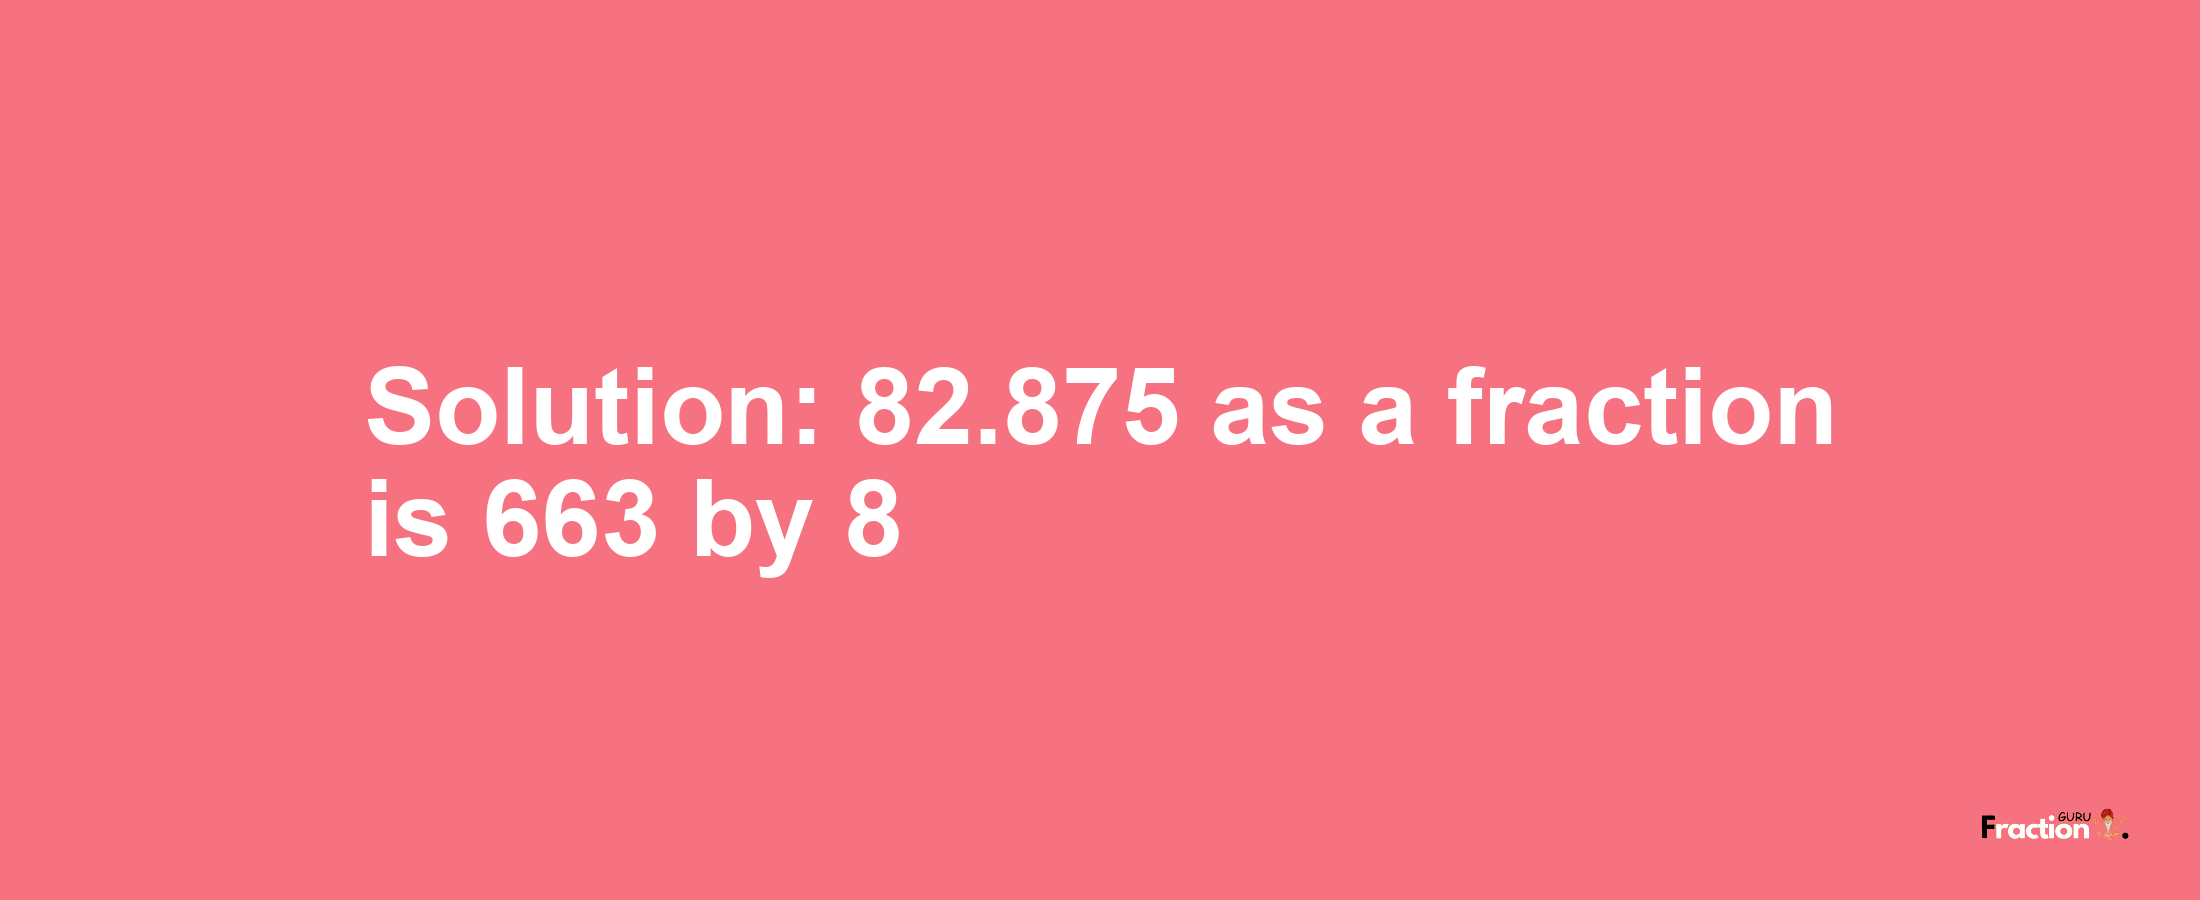 Solution:82.875 as a fraction is 663/8